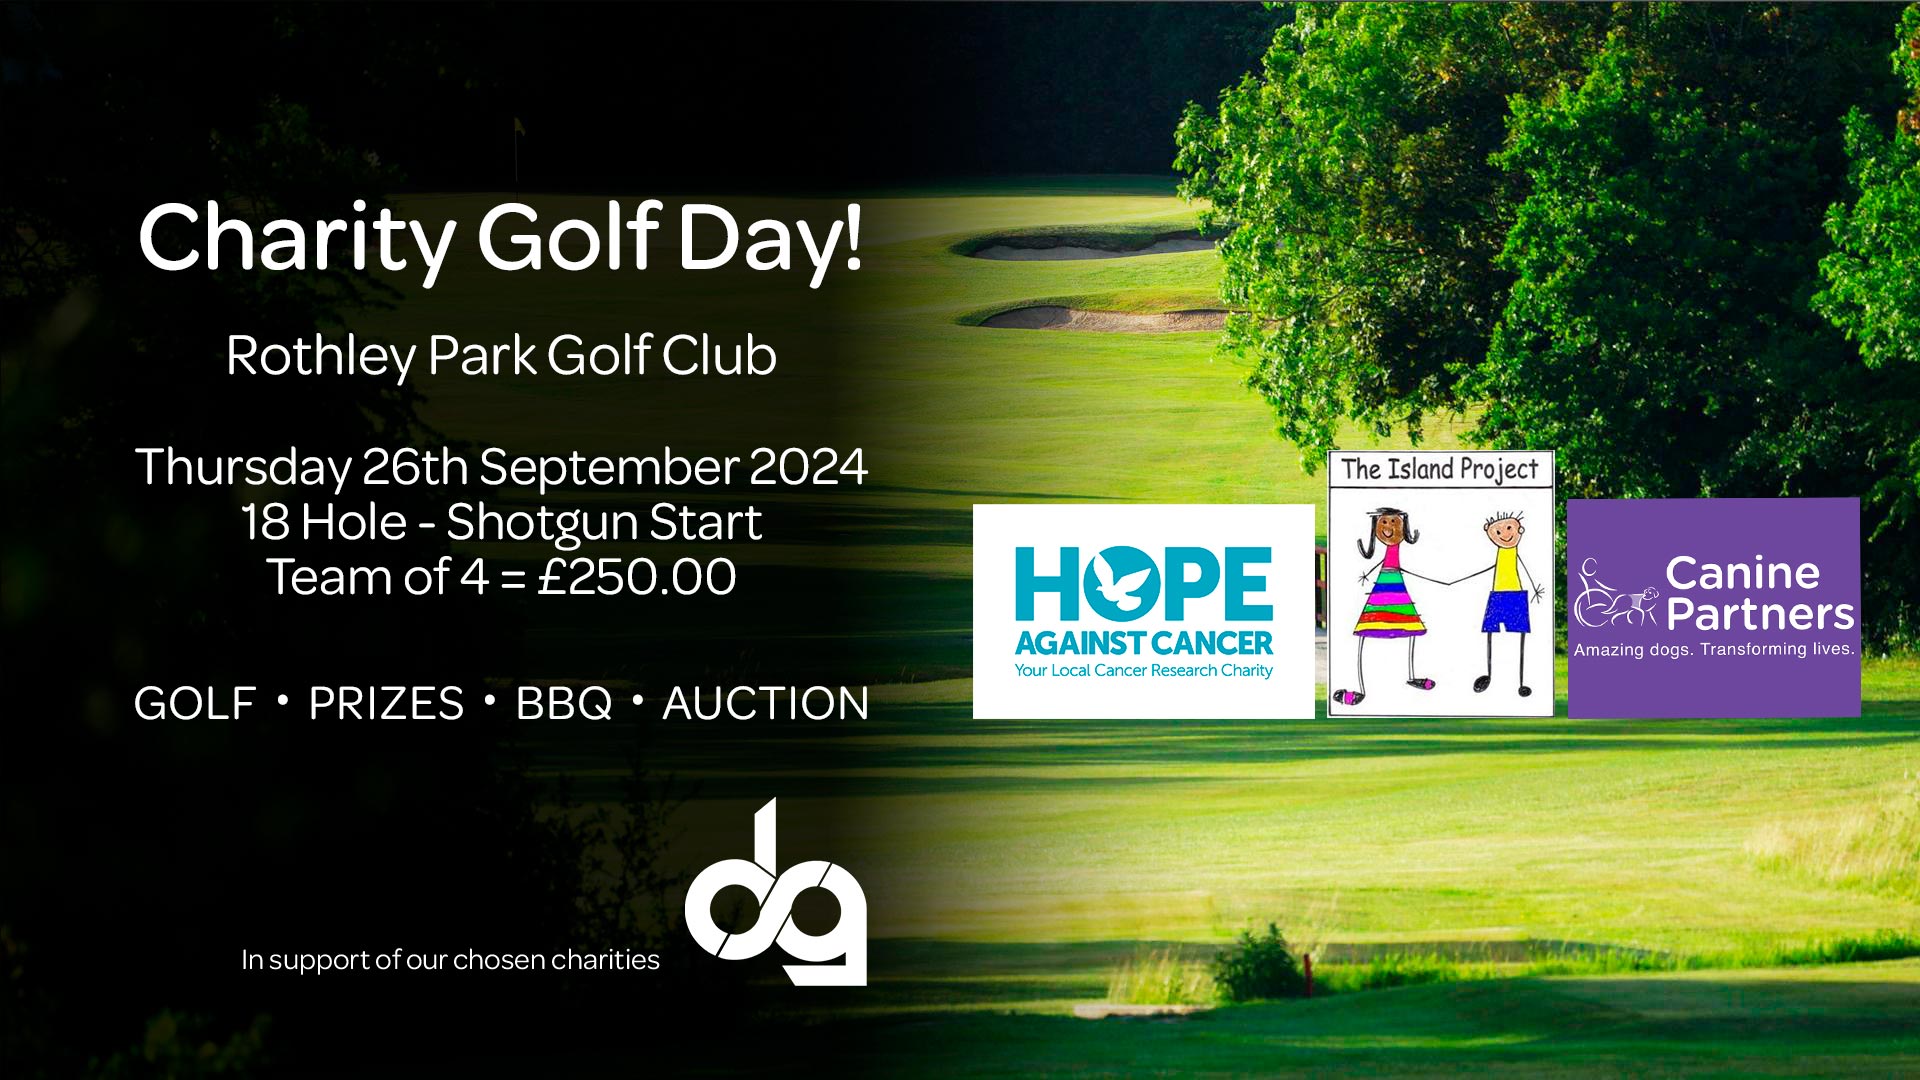 Join us on Thursday 26th September 2024 for our charity Golf Day!